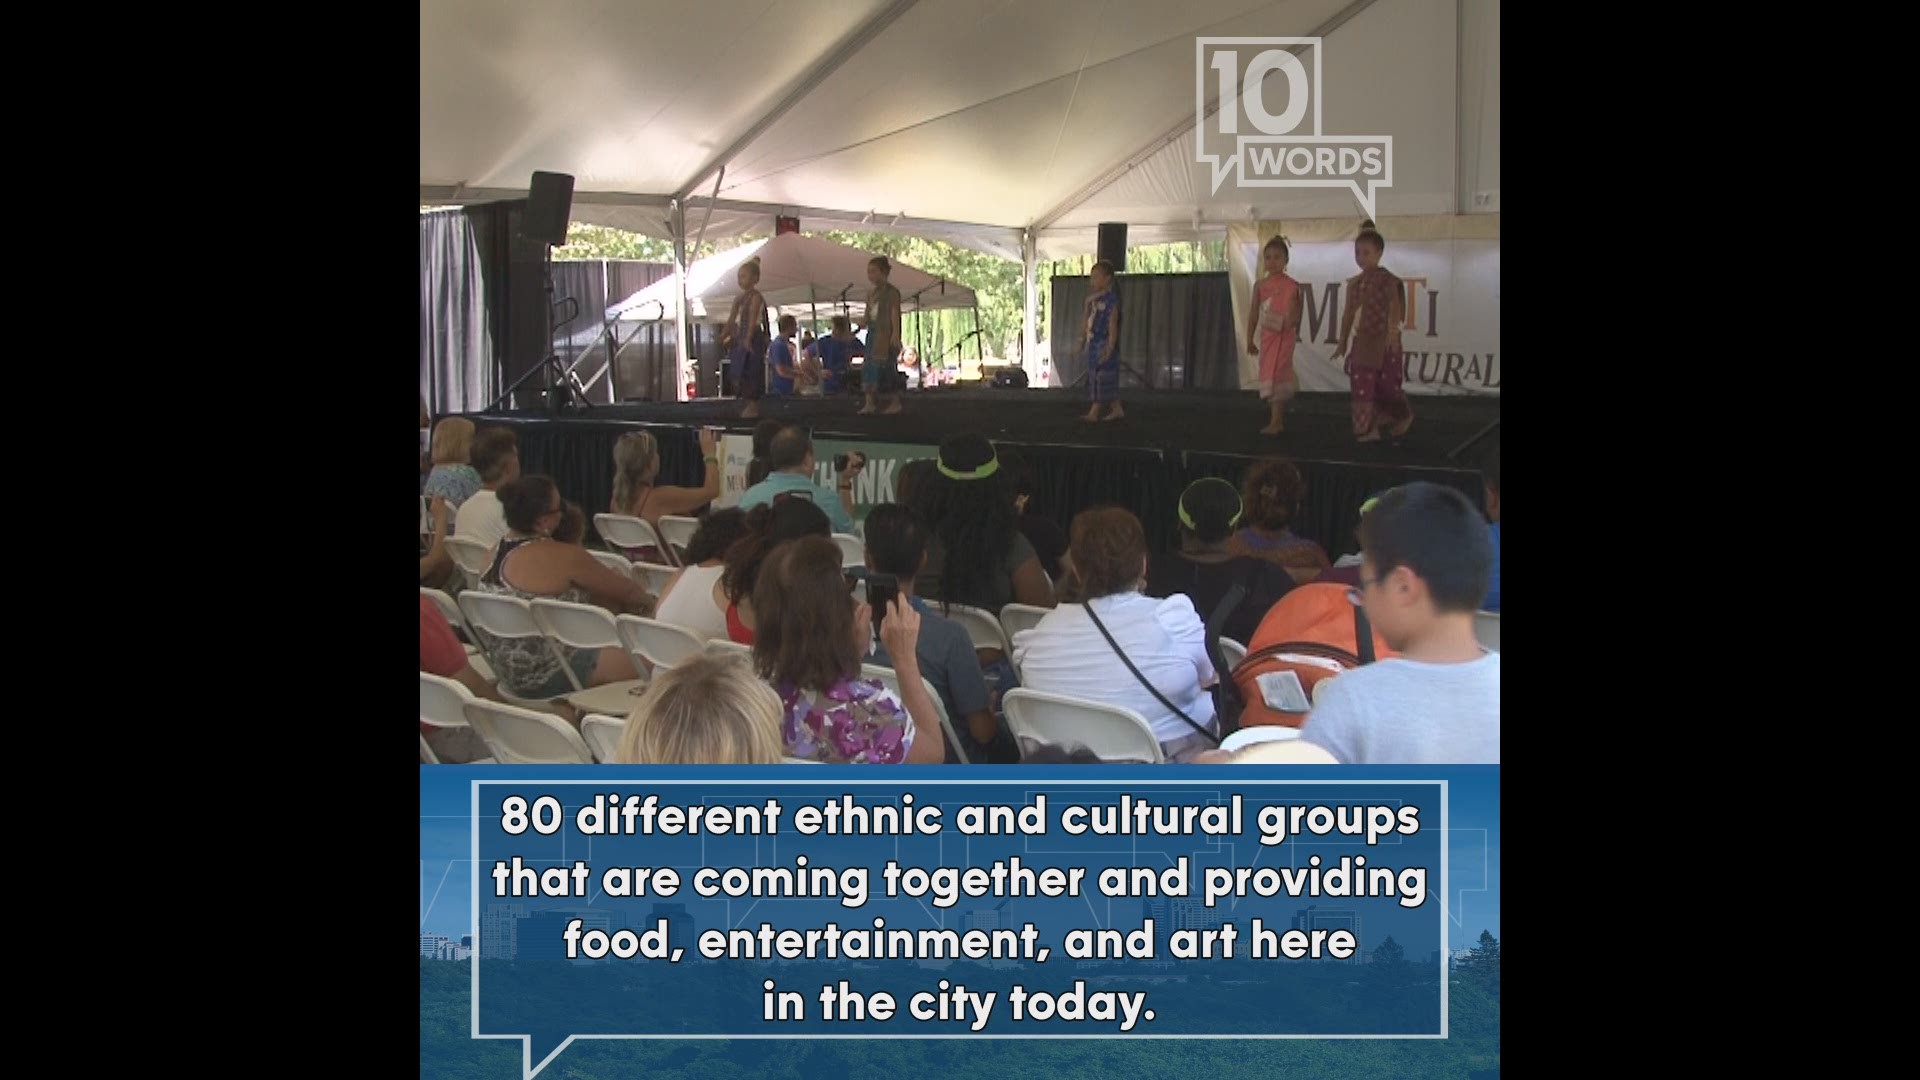 ABC 10 Words talked with Elk Grove Mayor Steve Ly about diversity.